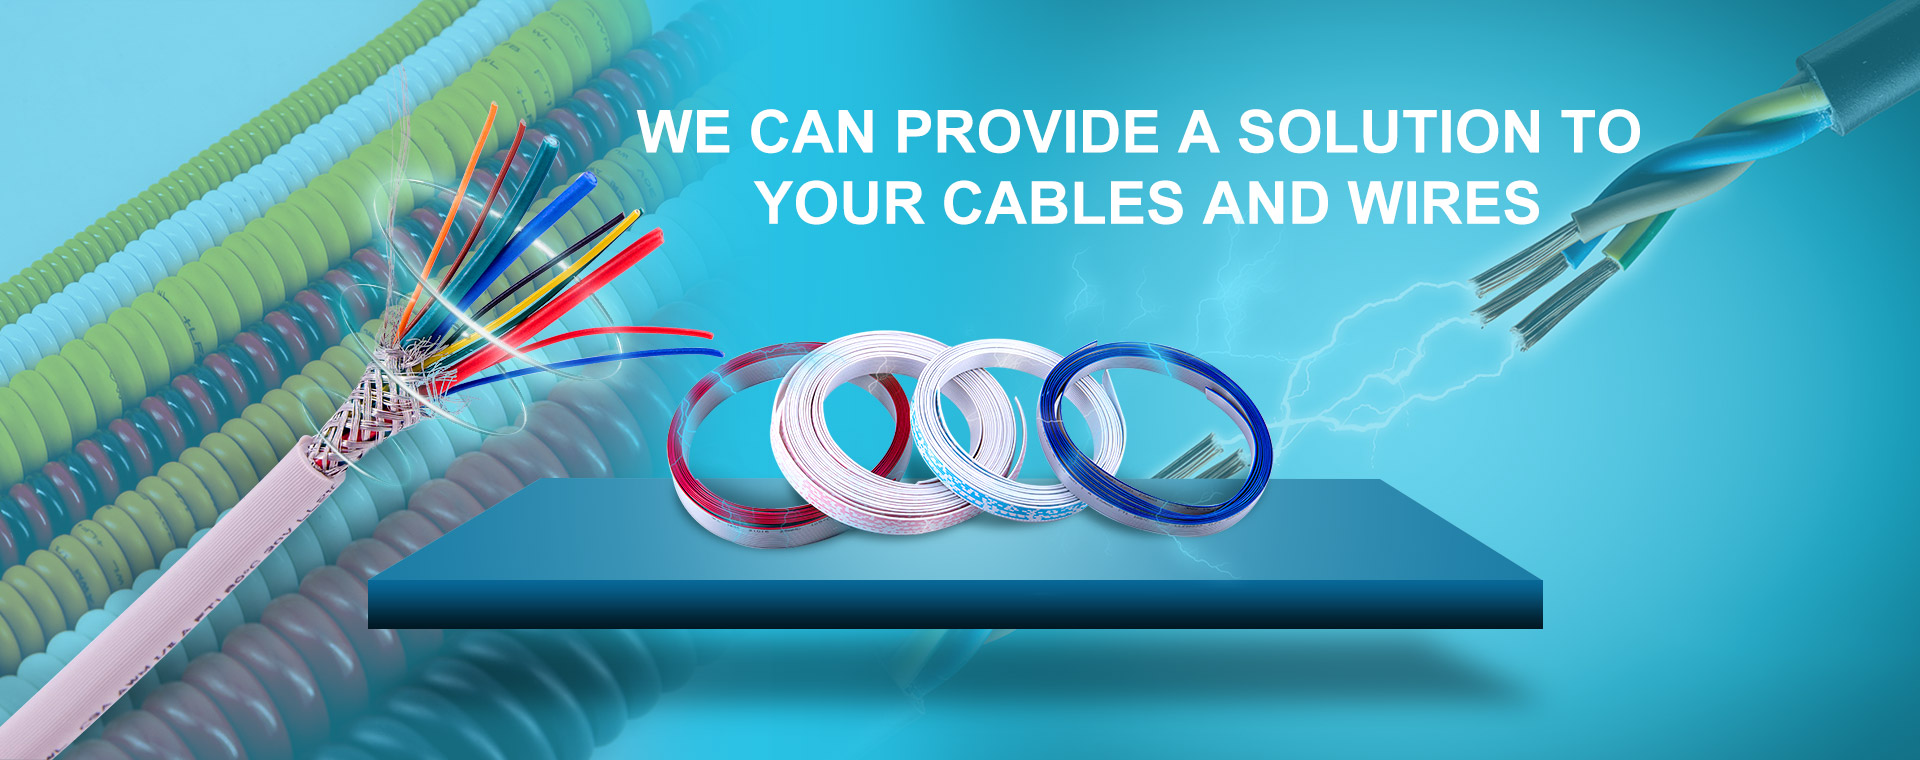 WE CAN PROVIDE A SOLUTIONTO  YOUR CABLES AND WIRES